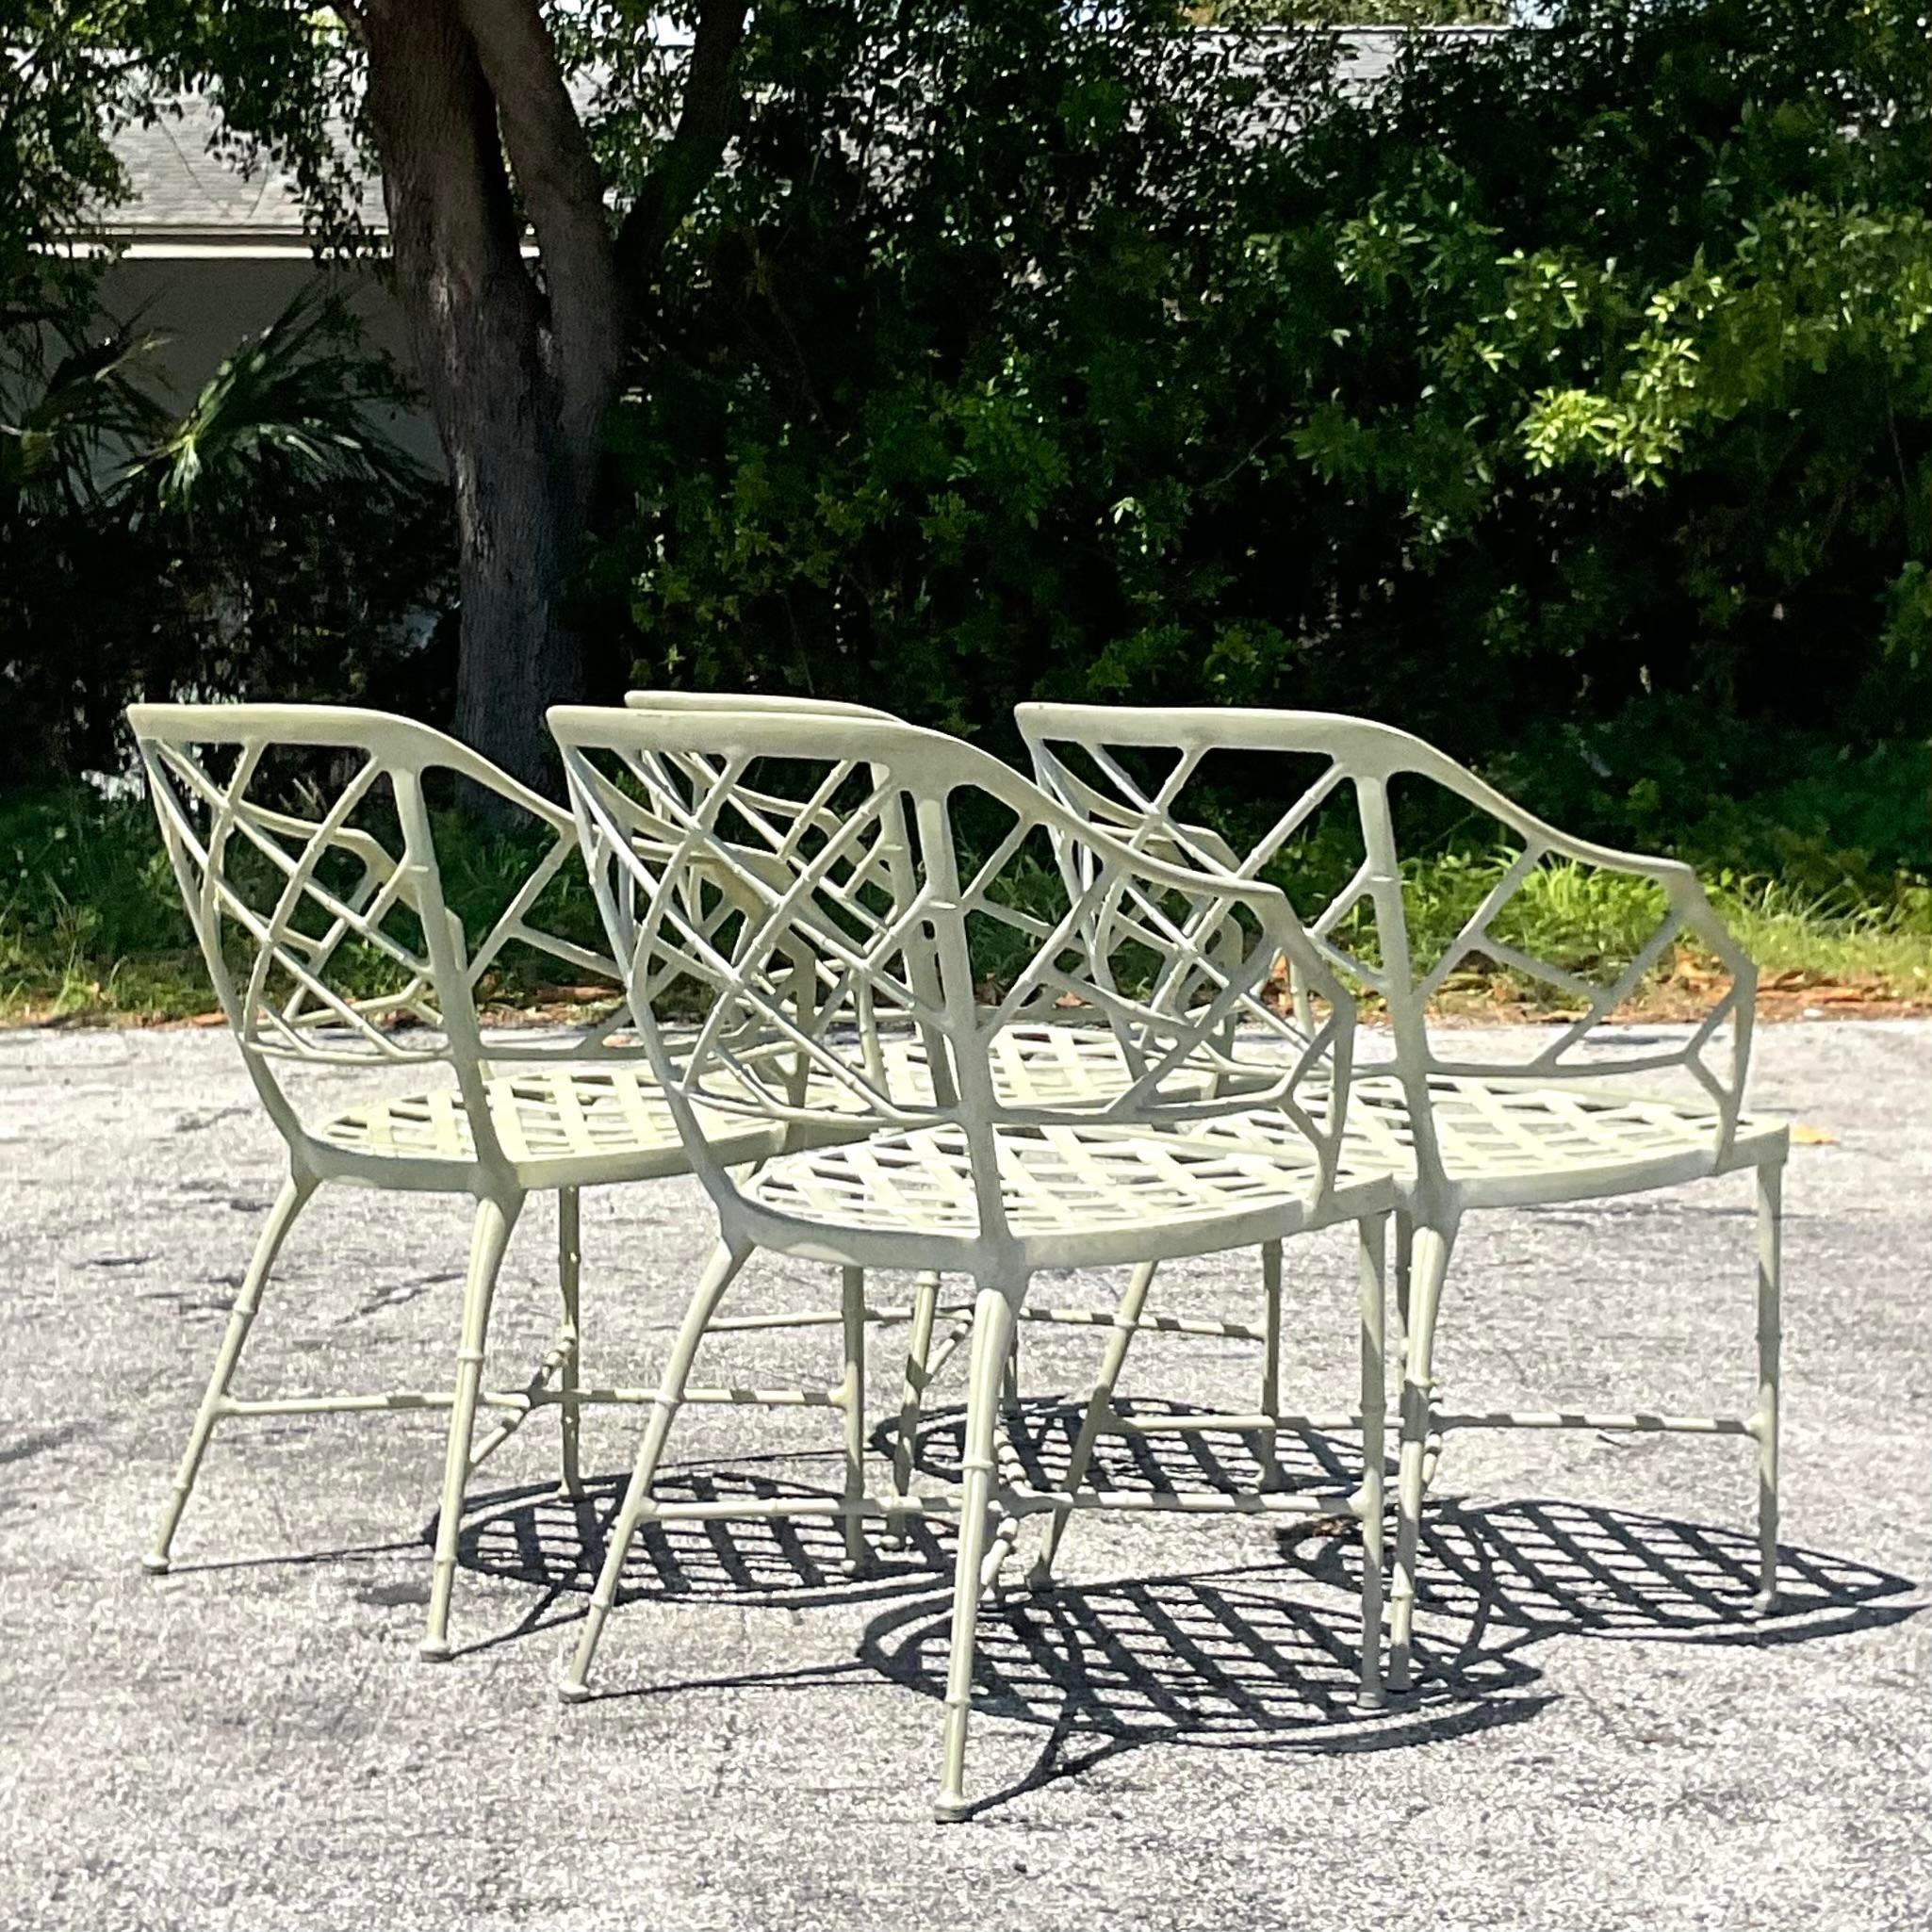 20th Century Vintage Boho “Calcutta” Dining Chairs After Brown Jordan - Set of 4 For Sale